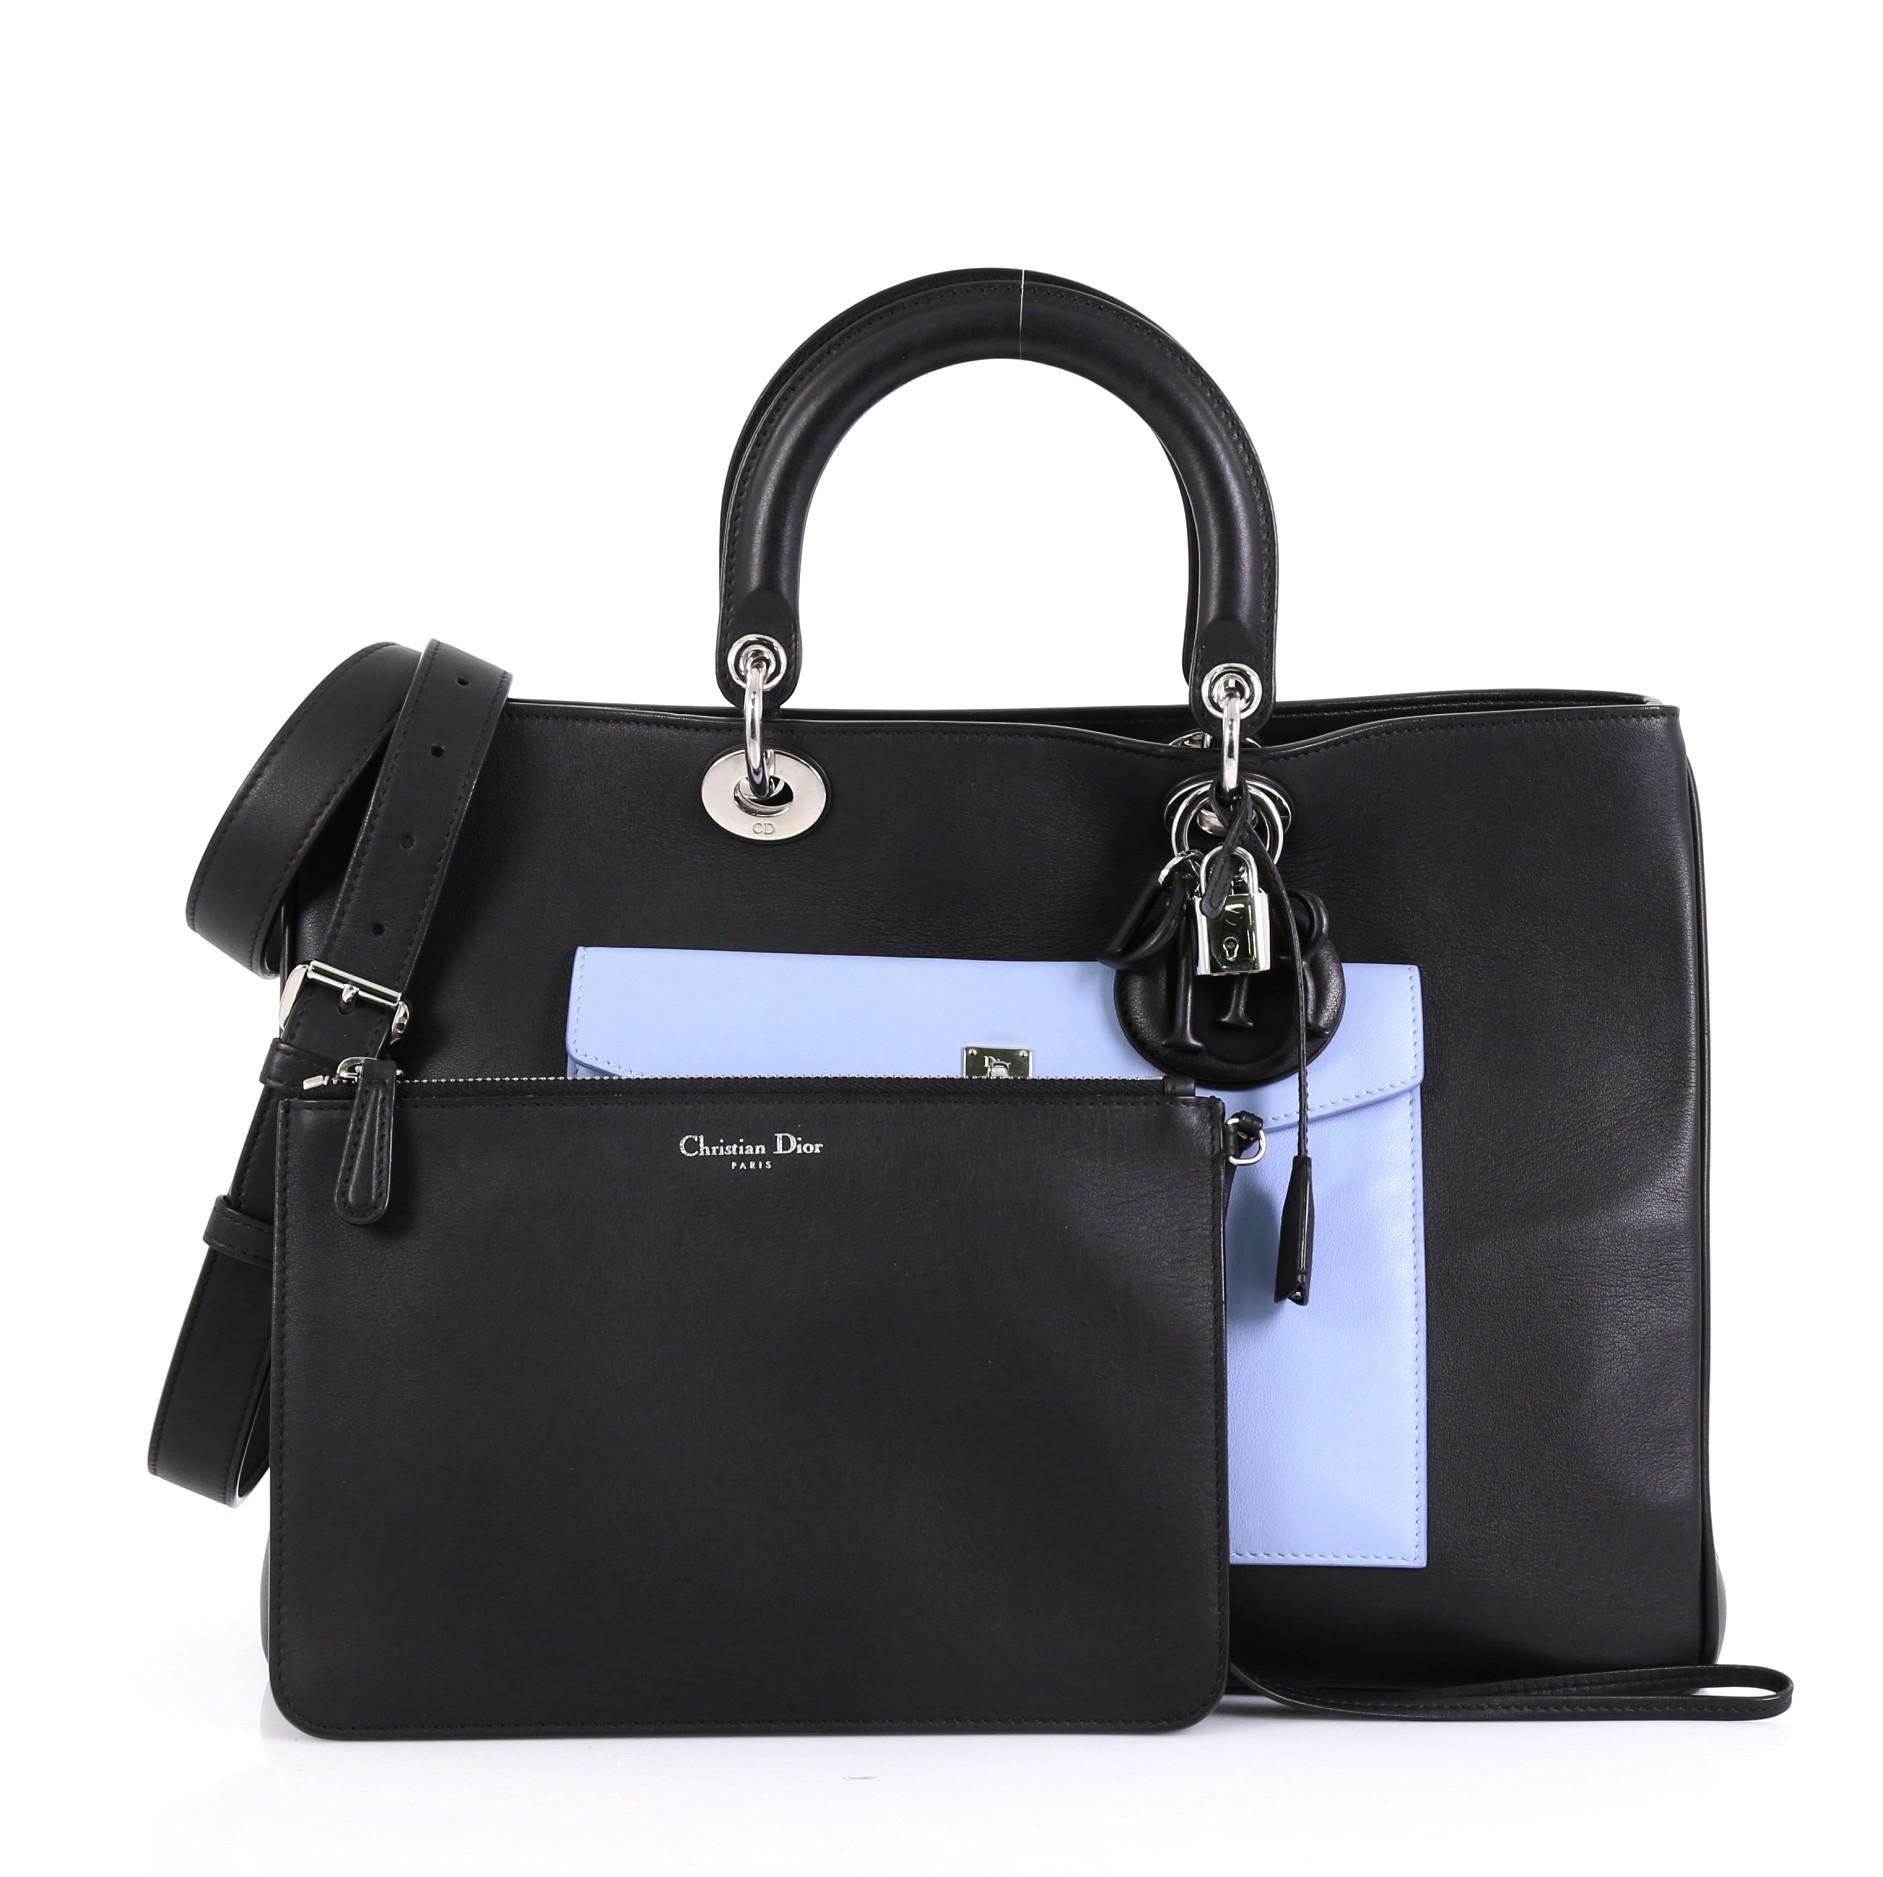 This Christian Dior Diorissimo Pocket Tote Leather Large, crafted from black, red and light blue leather, features dual short handles with Dior charms, side snap buttons, exterior front and back flap pockets, protective base studs, and silver-tone